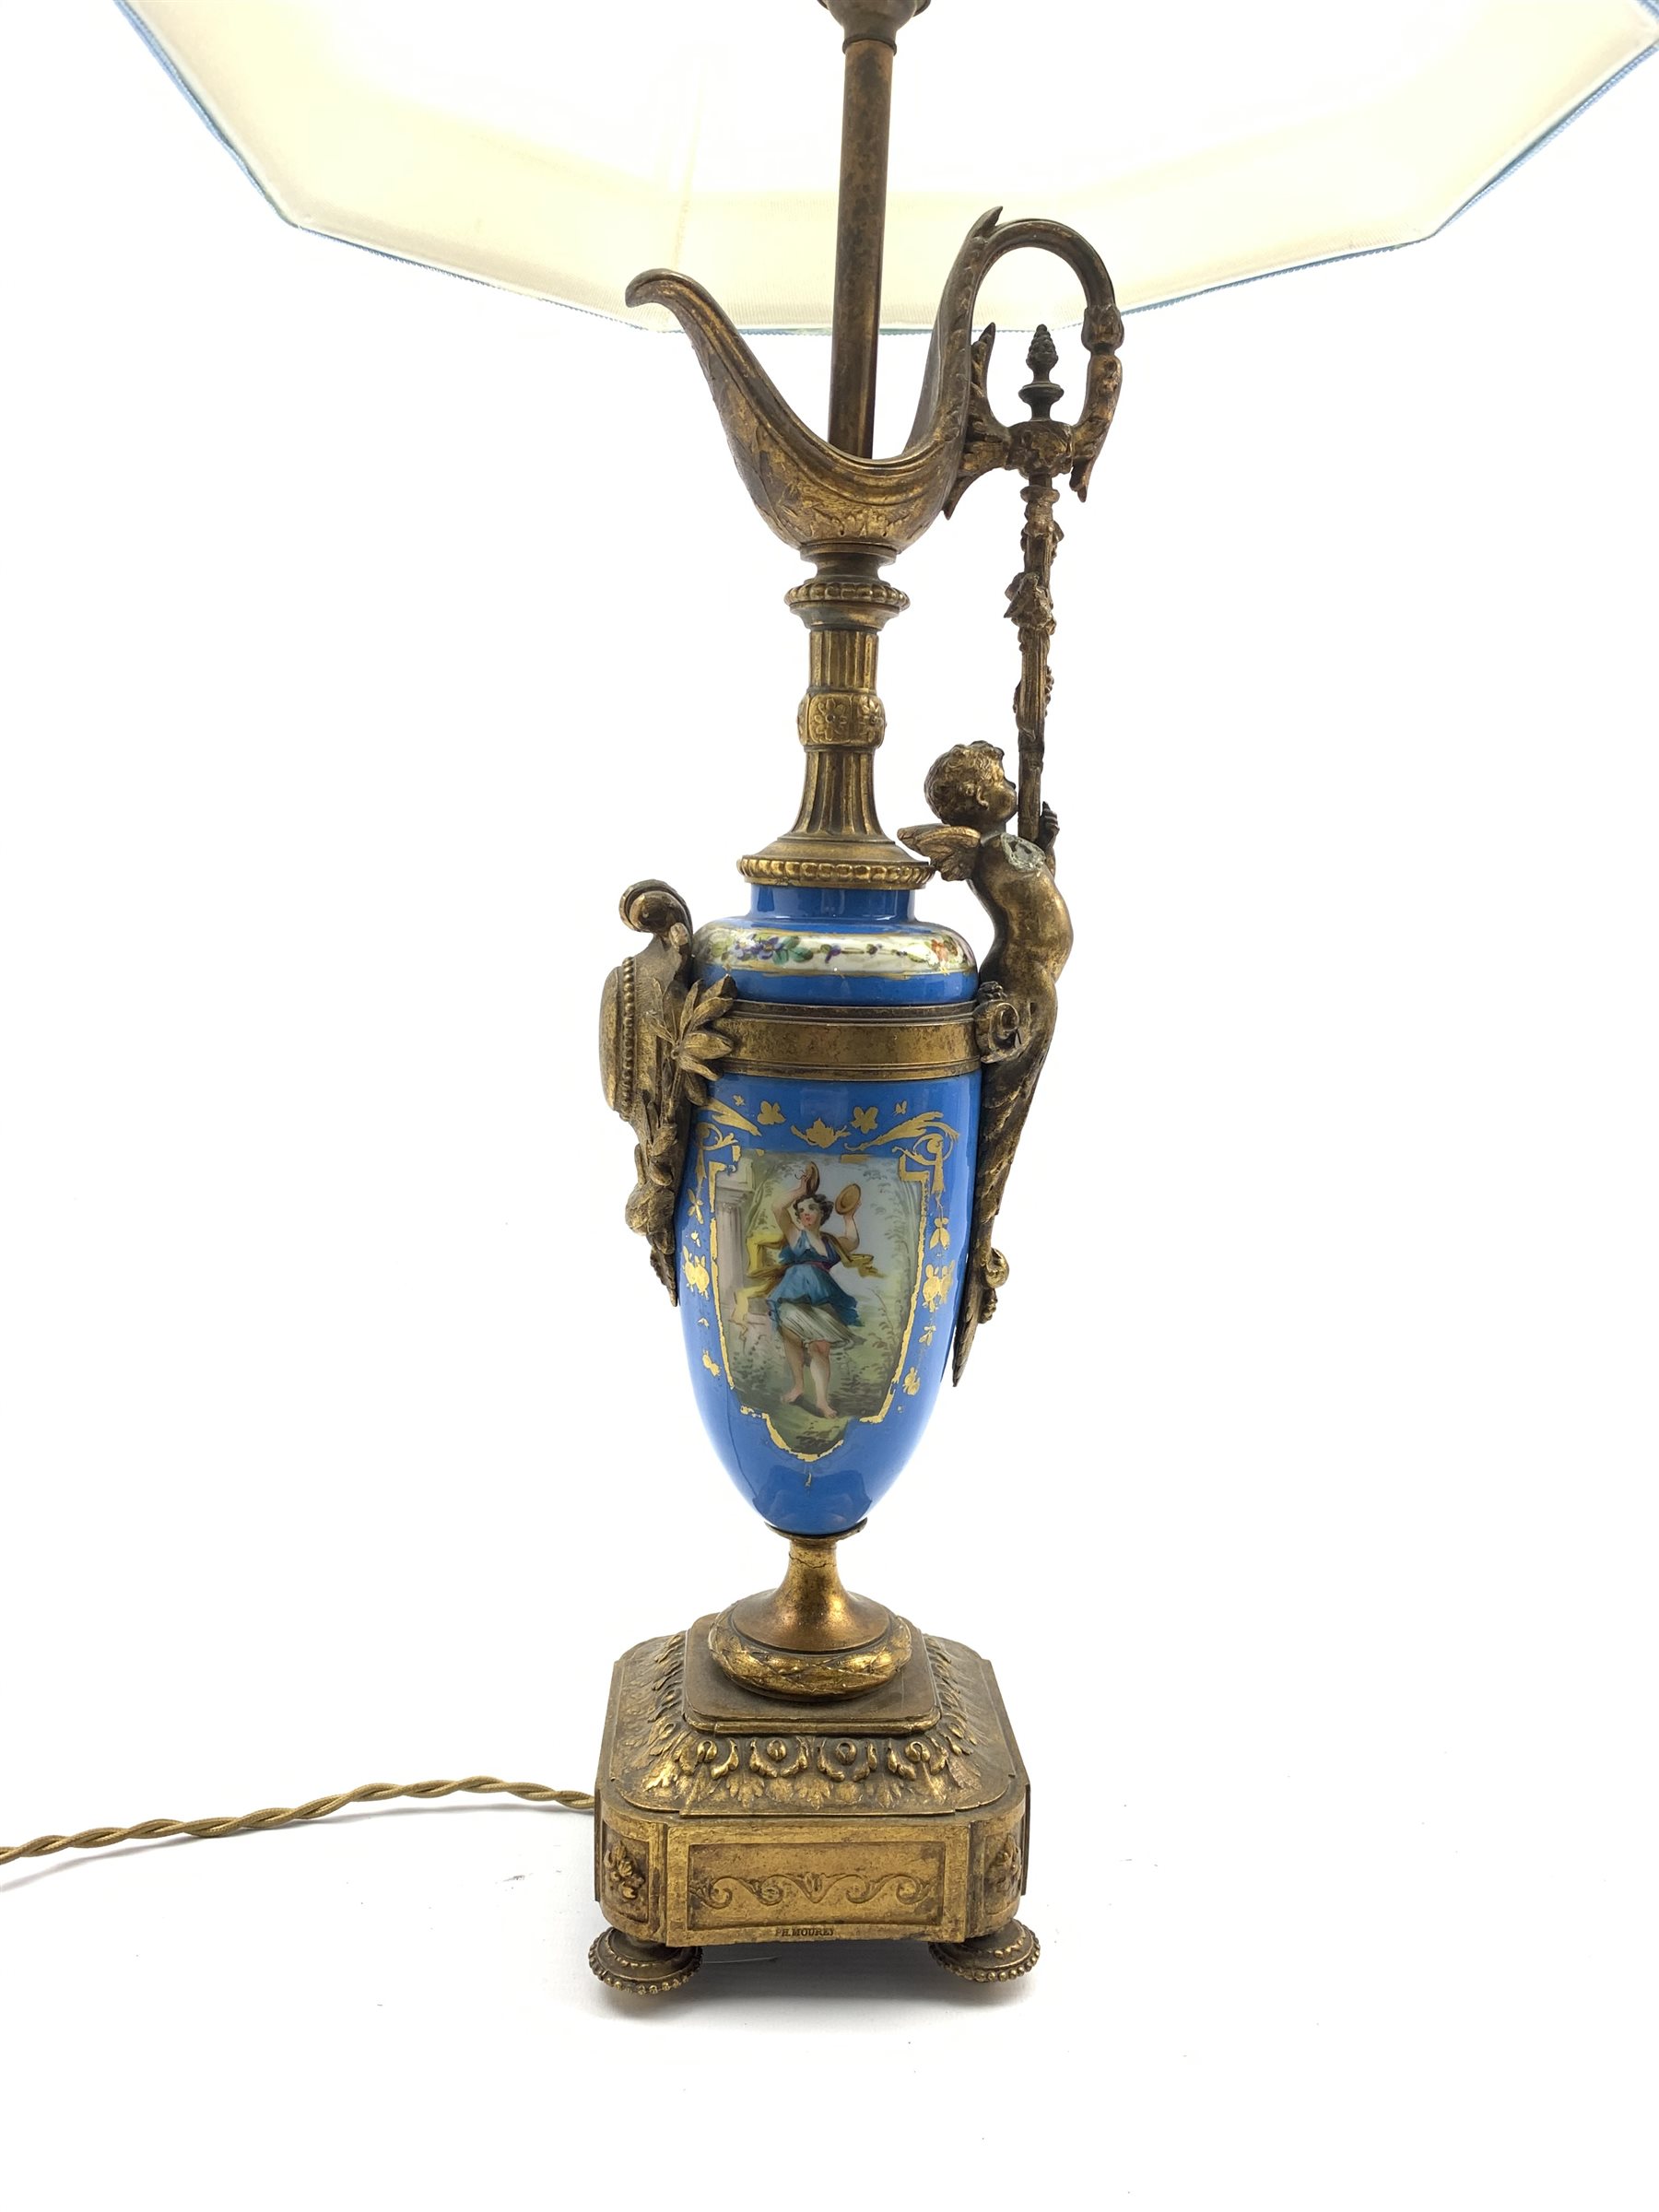 Continental Porcelain table lamp in the form of a ewer decorated with figure panel on a blue ground - Image 3 of 5